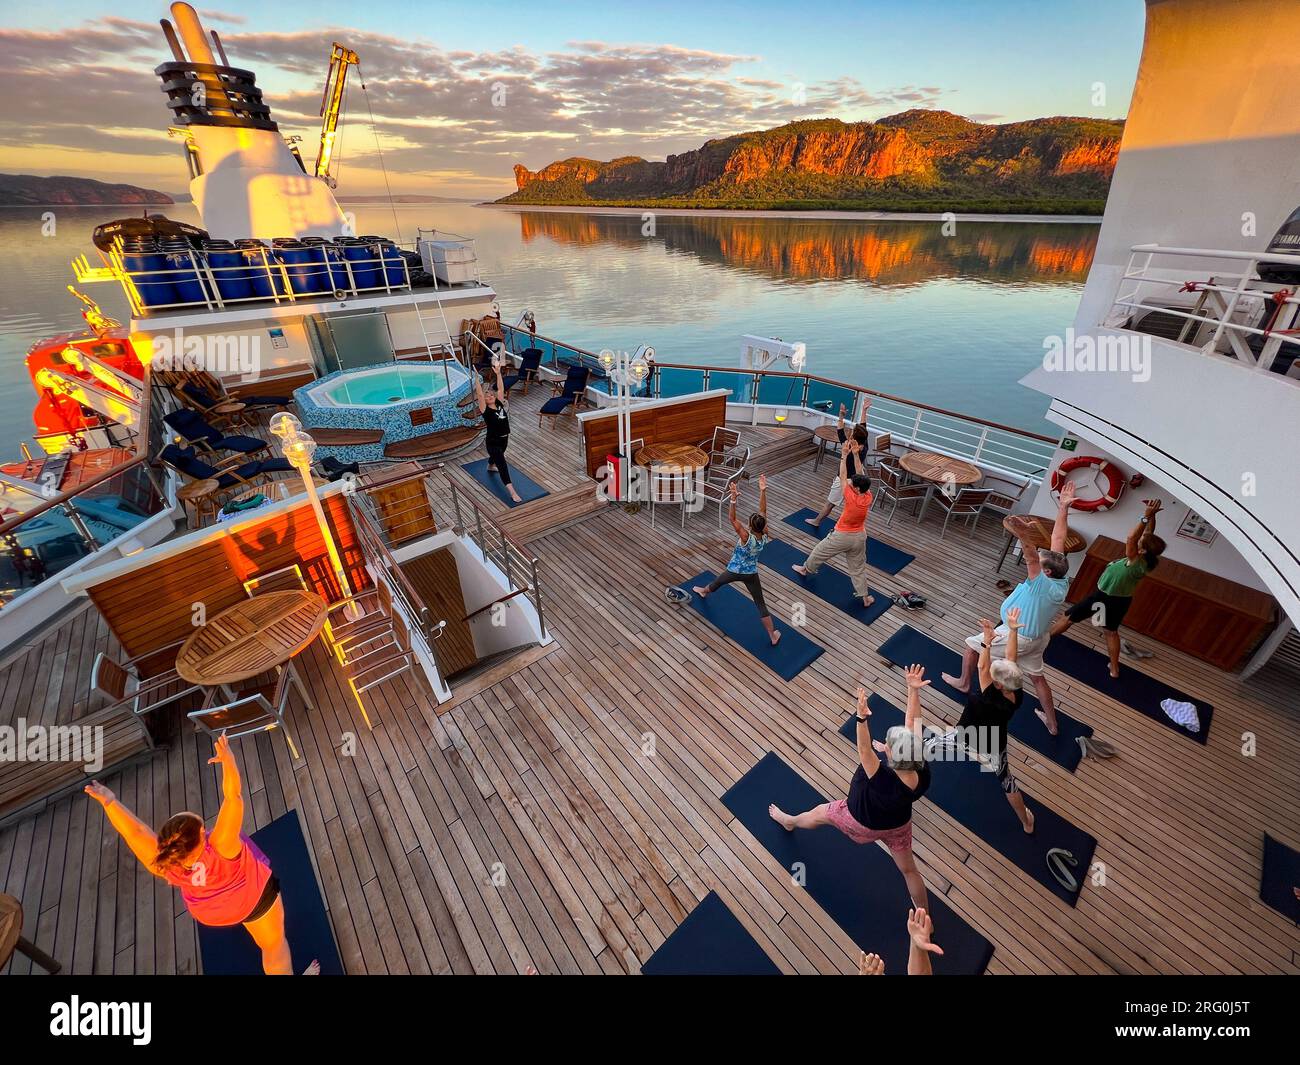 Morning yoga on the National Geographic Orion on the Hunter River in Kimberley Australia Stock Photo